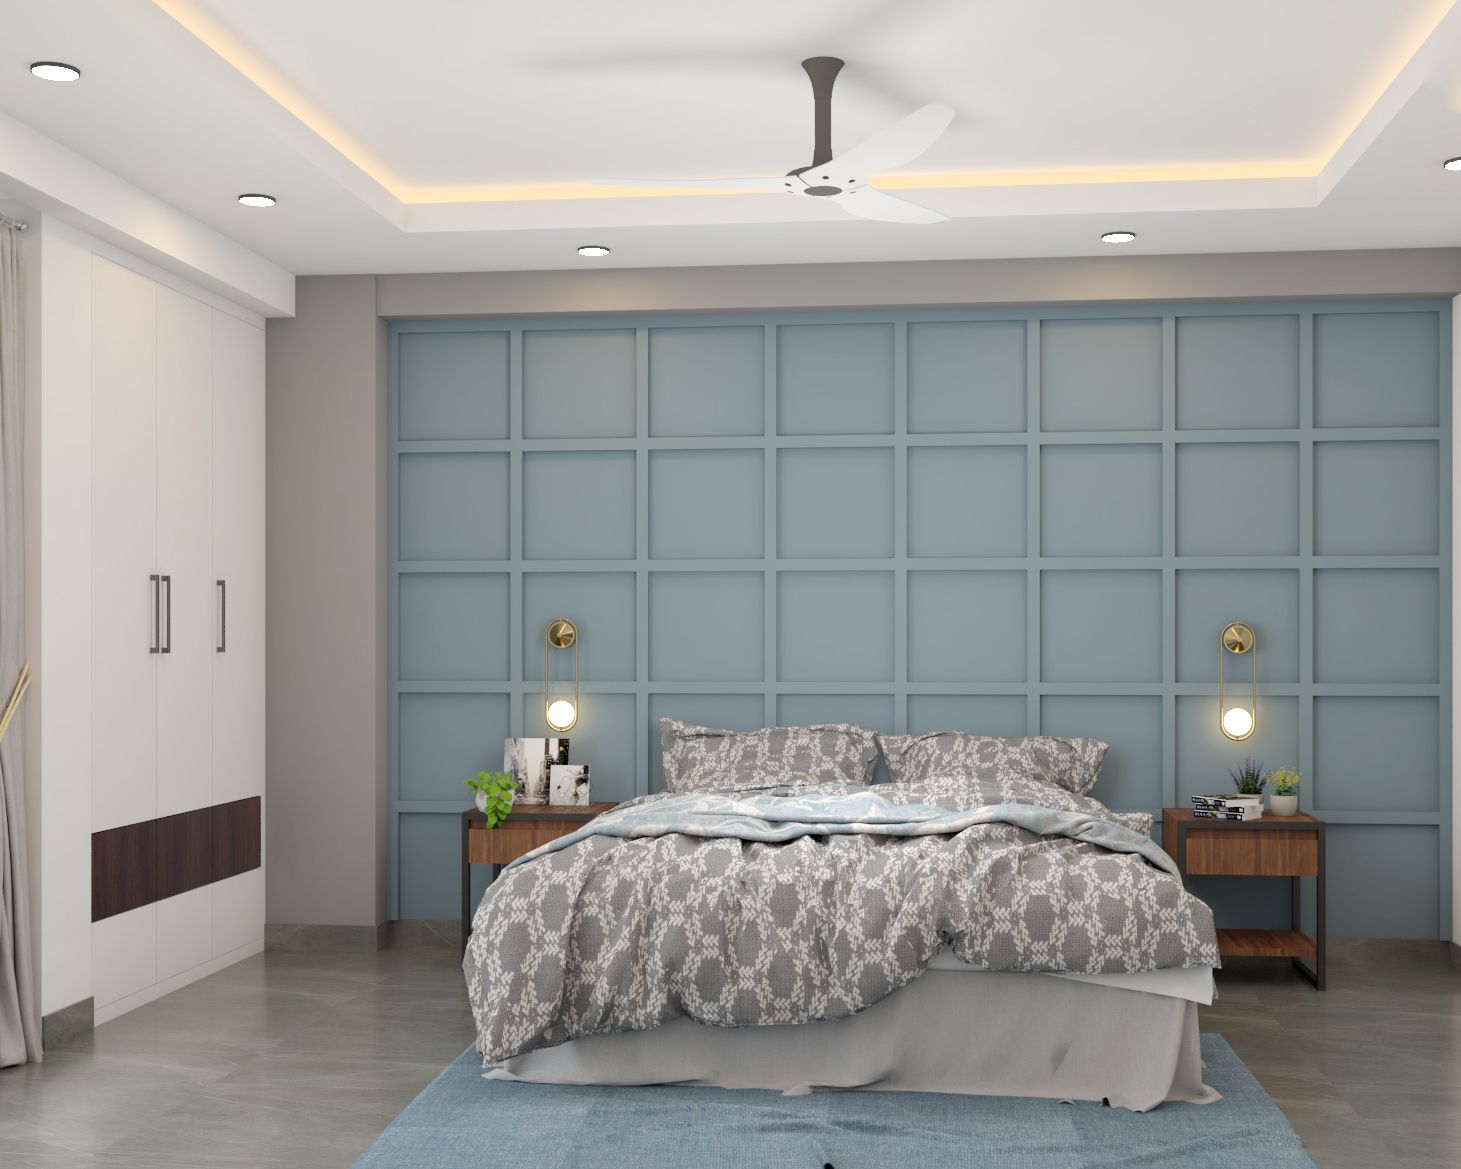 Contemporary Teal-Blue Master Bedroom Design With Grid Wall